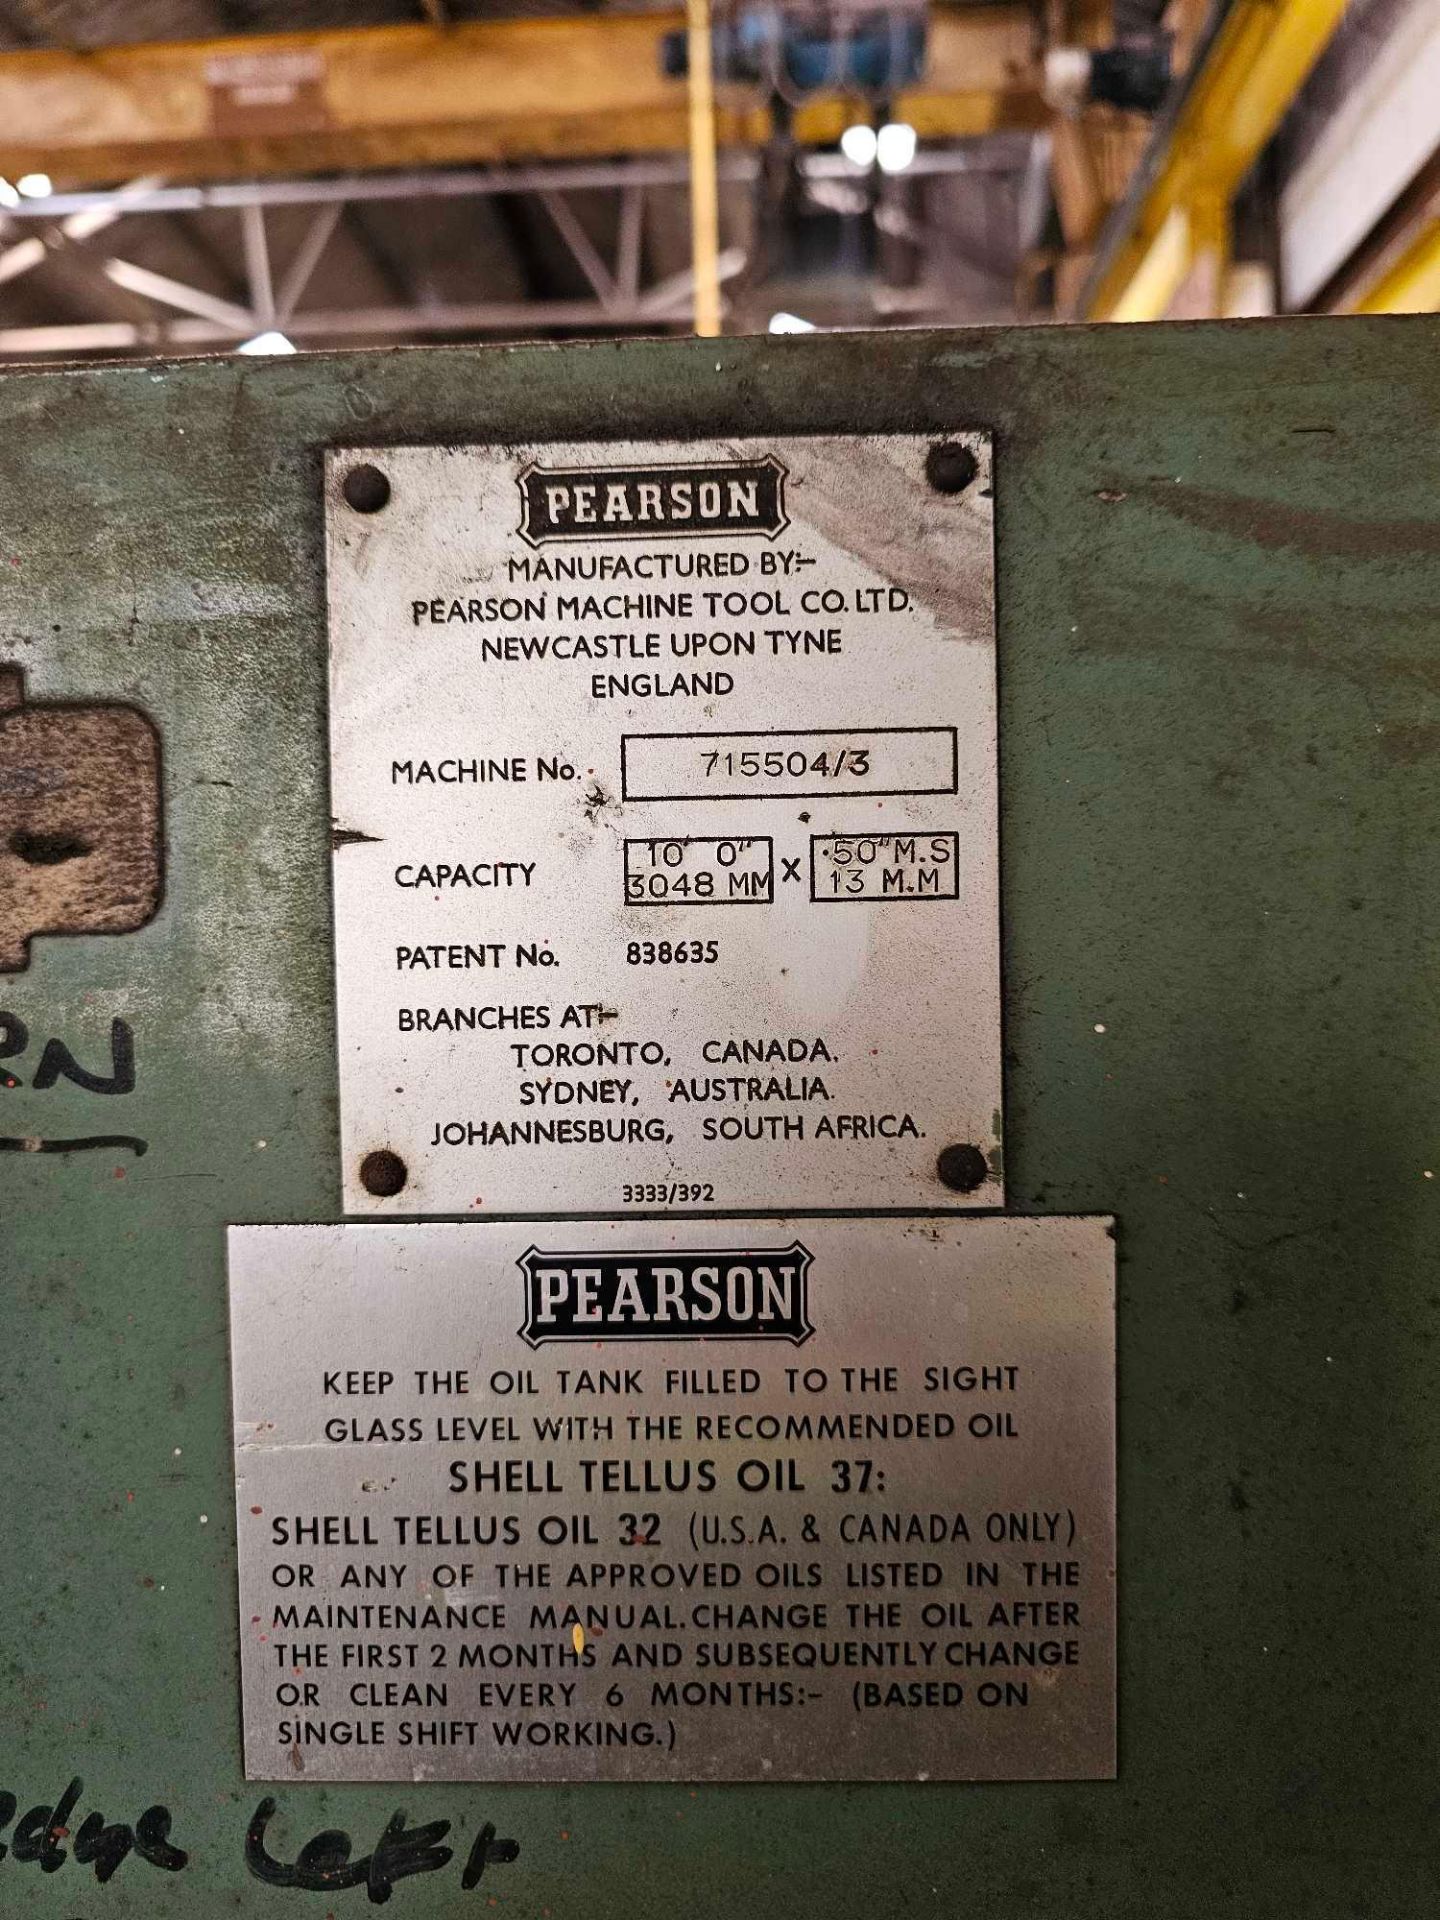 Pearsons Hydraulic Guillotine Capacity: 10-0 -3048cm x 50.5 x 13mm (S/N 715504-3) - Image 7 of 8